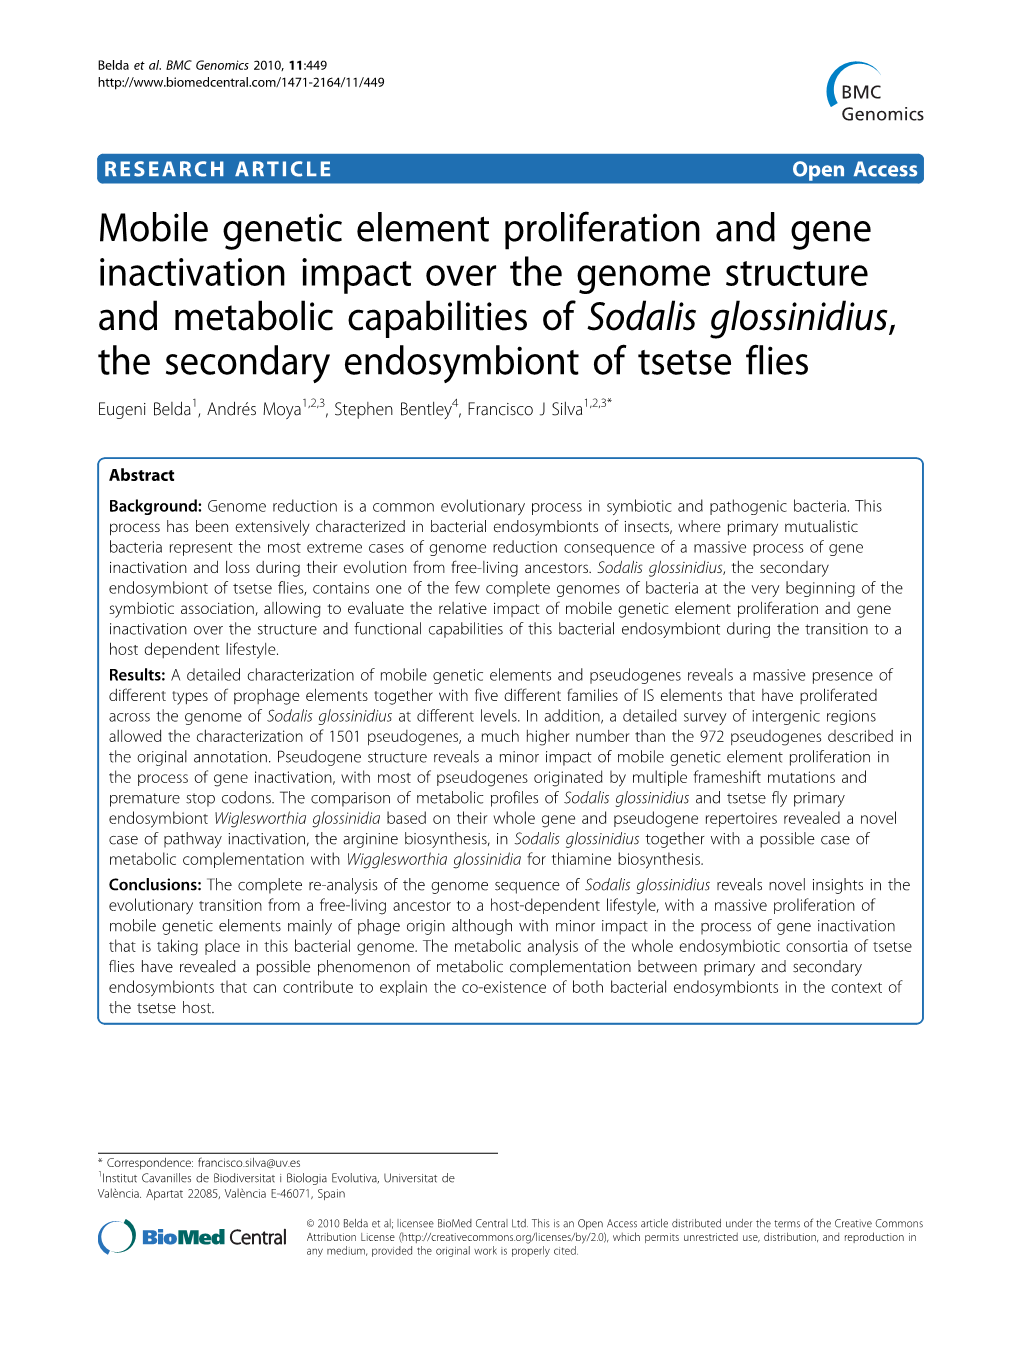 Mobile Genetic Element Proliferation and Gene Inactivation Impact Over